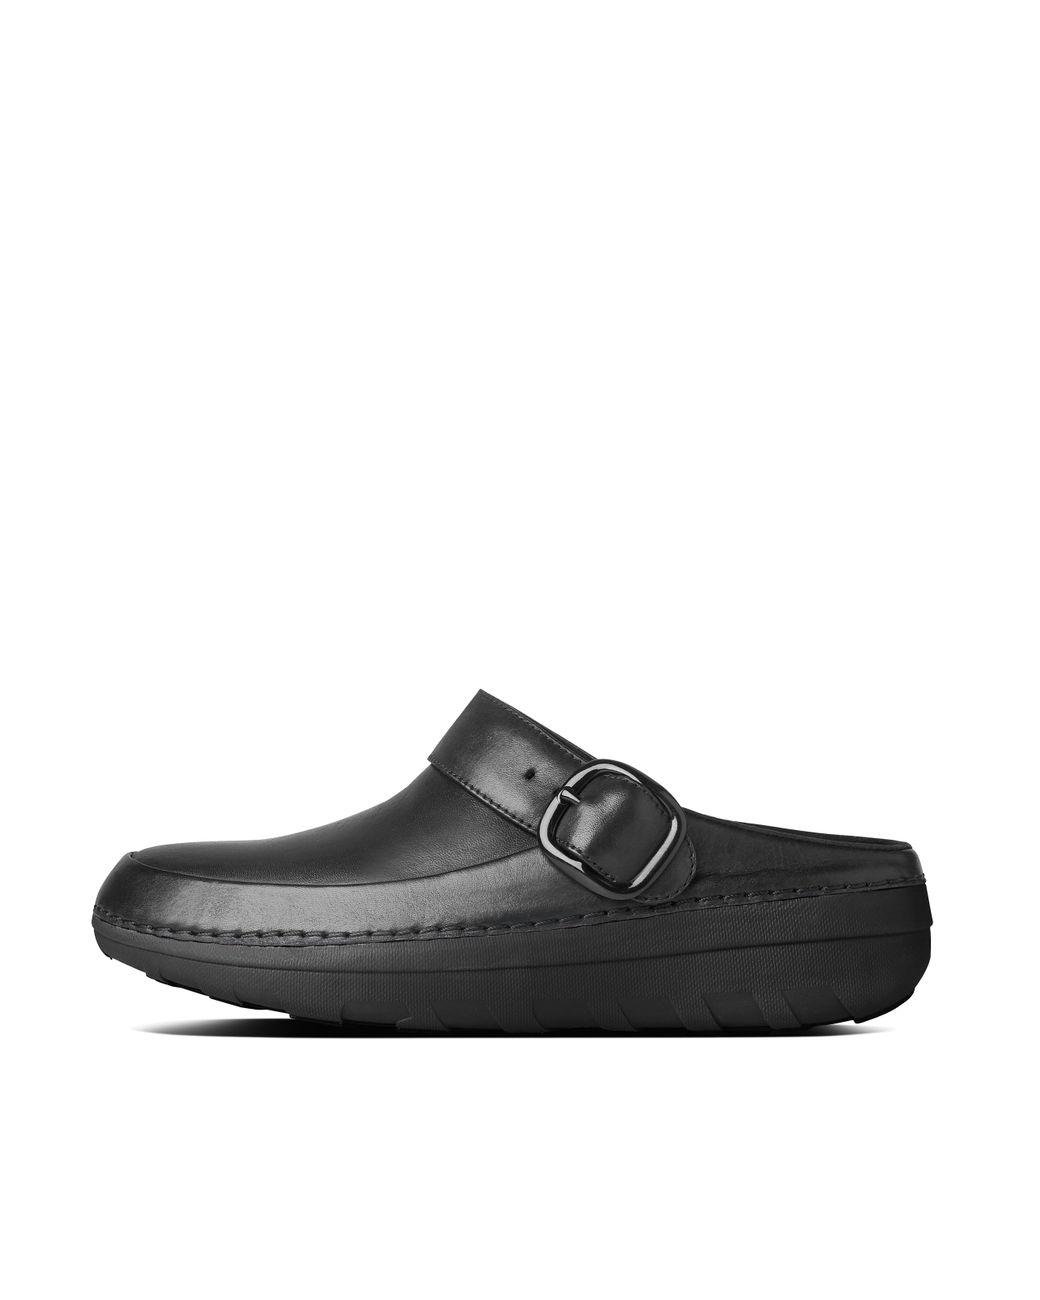 Fitflop Leather Gogh Pro Superlight Clogs in Black - Lyst